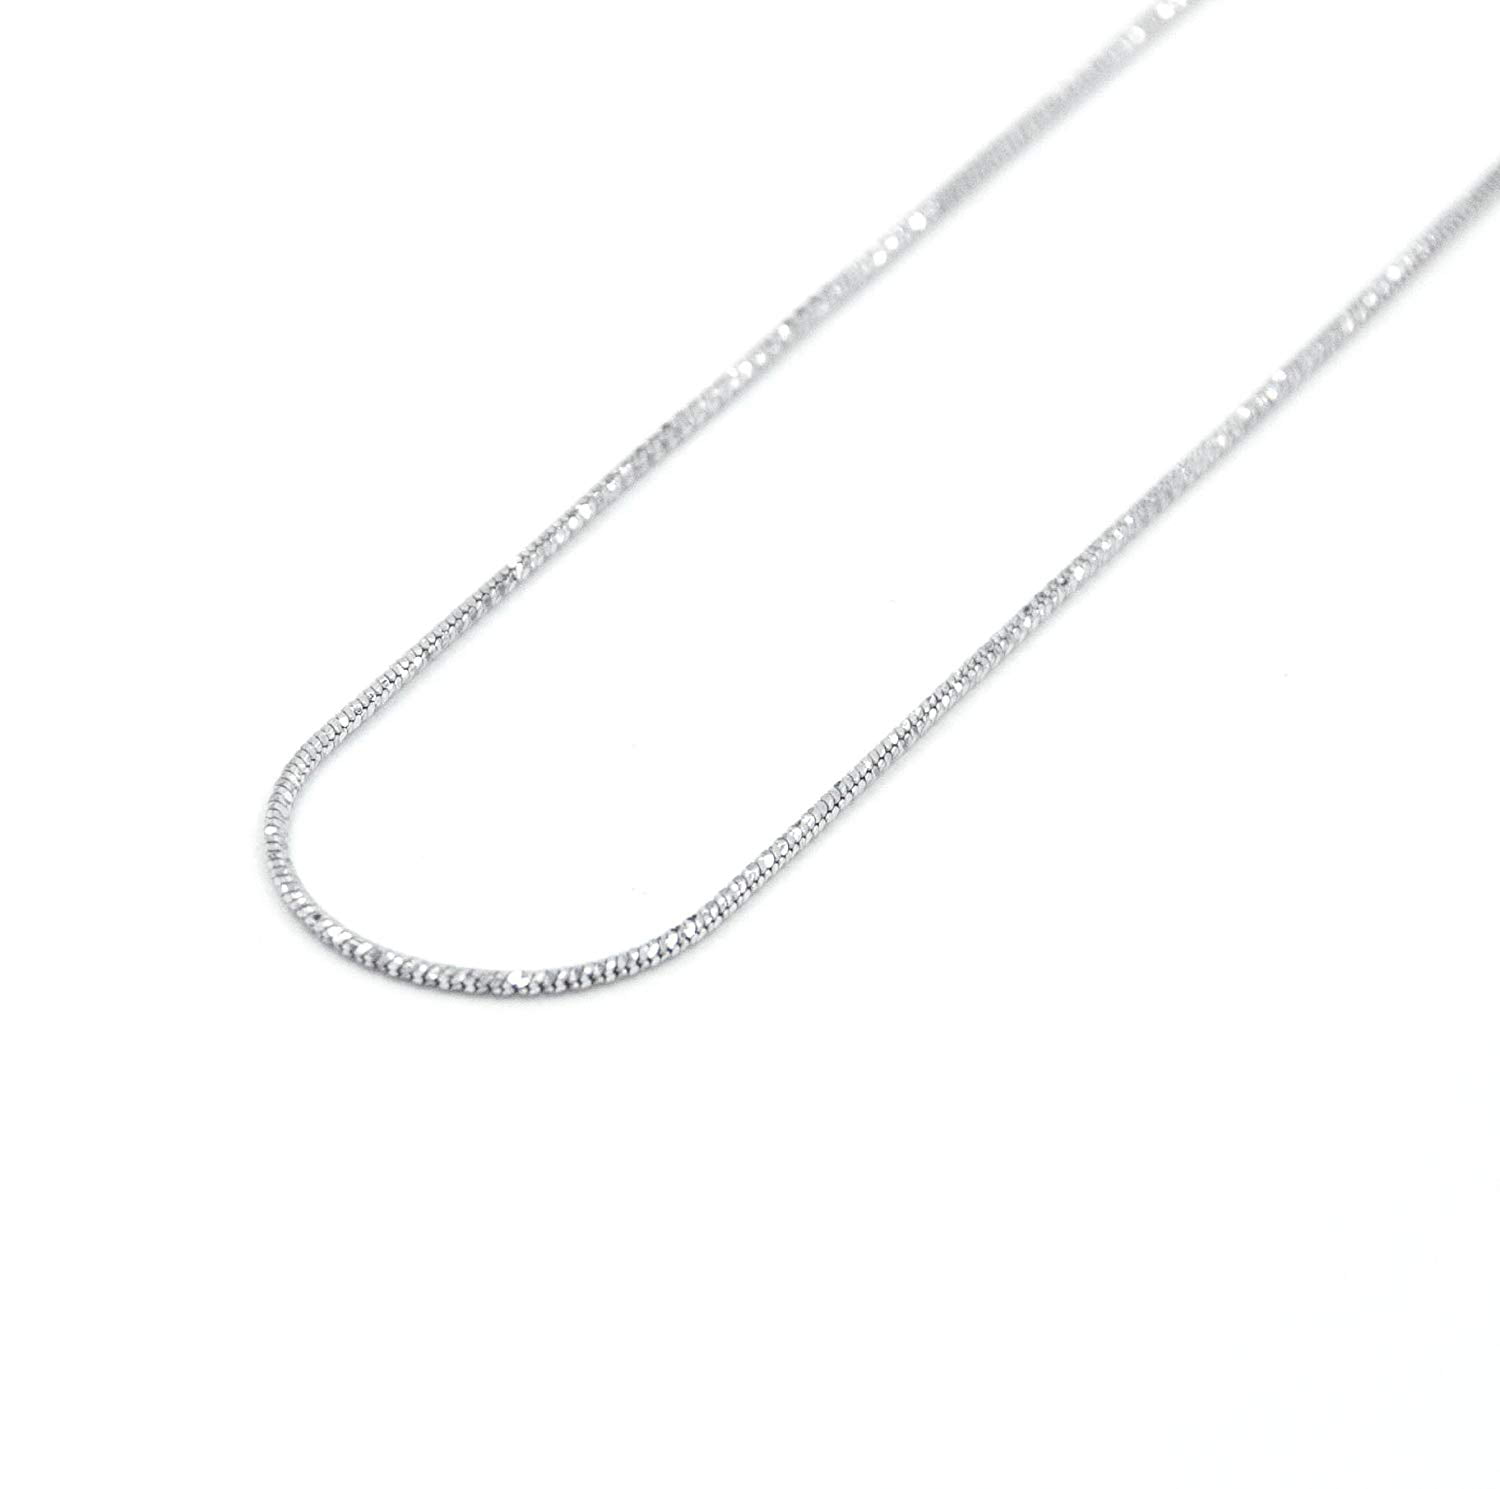 925 Sterling Silver Chain Necklace Round Snake Chain Super Thin & Strong Fit Most Pendants with Box